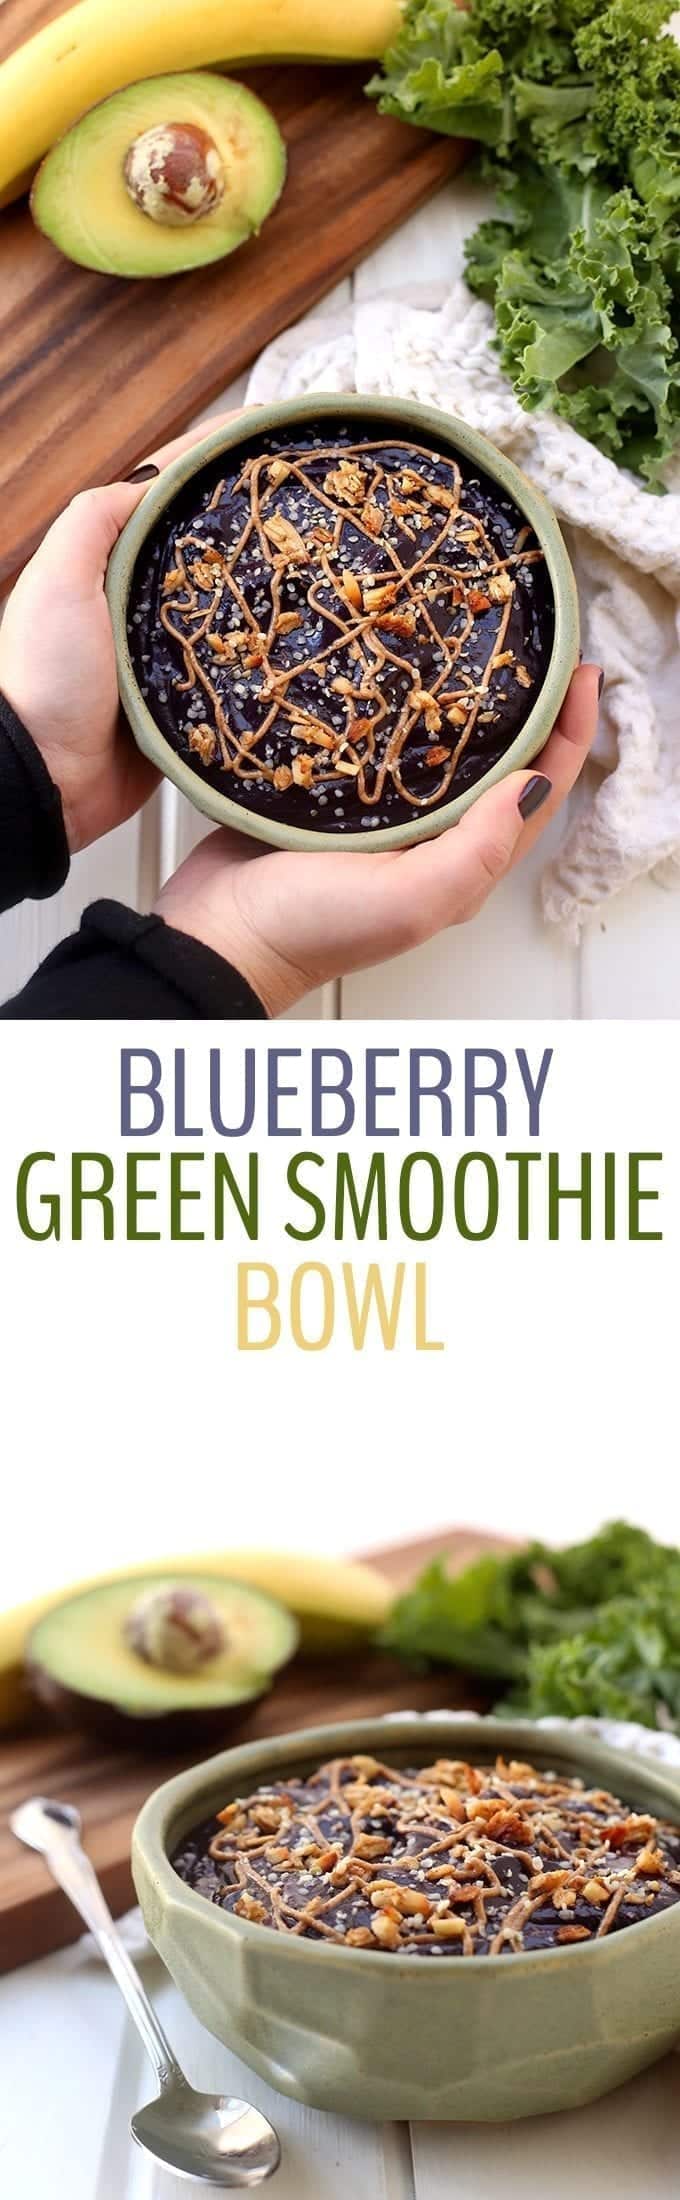 Get in your greens with this healthy and delicious Blueberry Green Smoothie Bowl recipe. Once you try eating a smoothie with a spoon, you will ditch the straw for life!